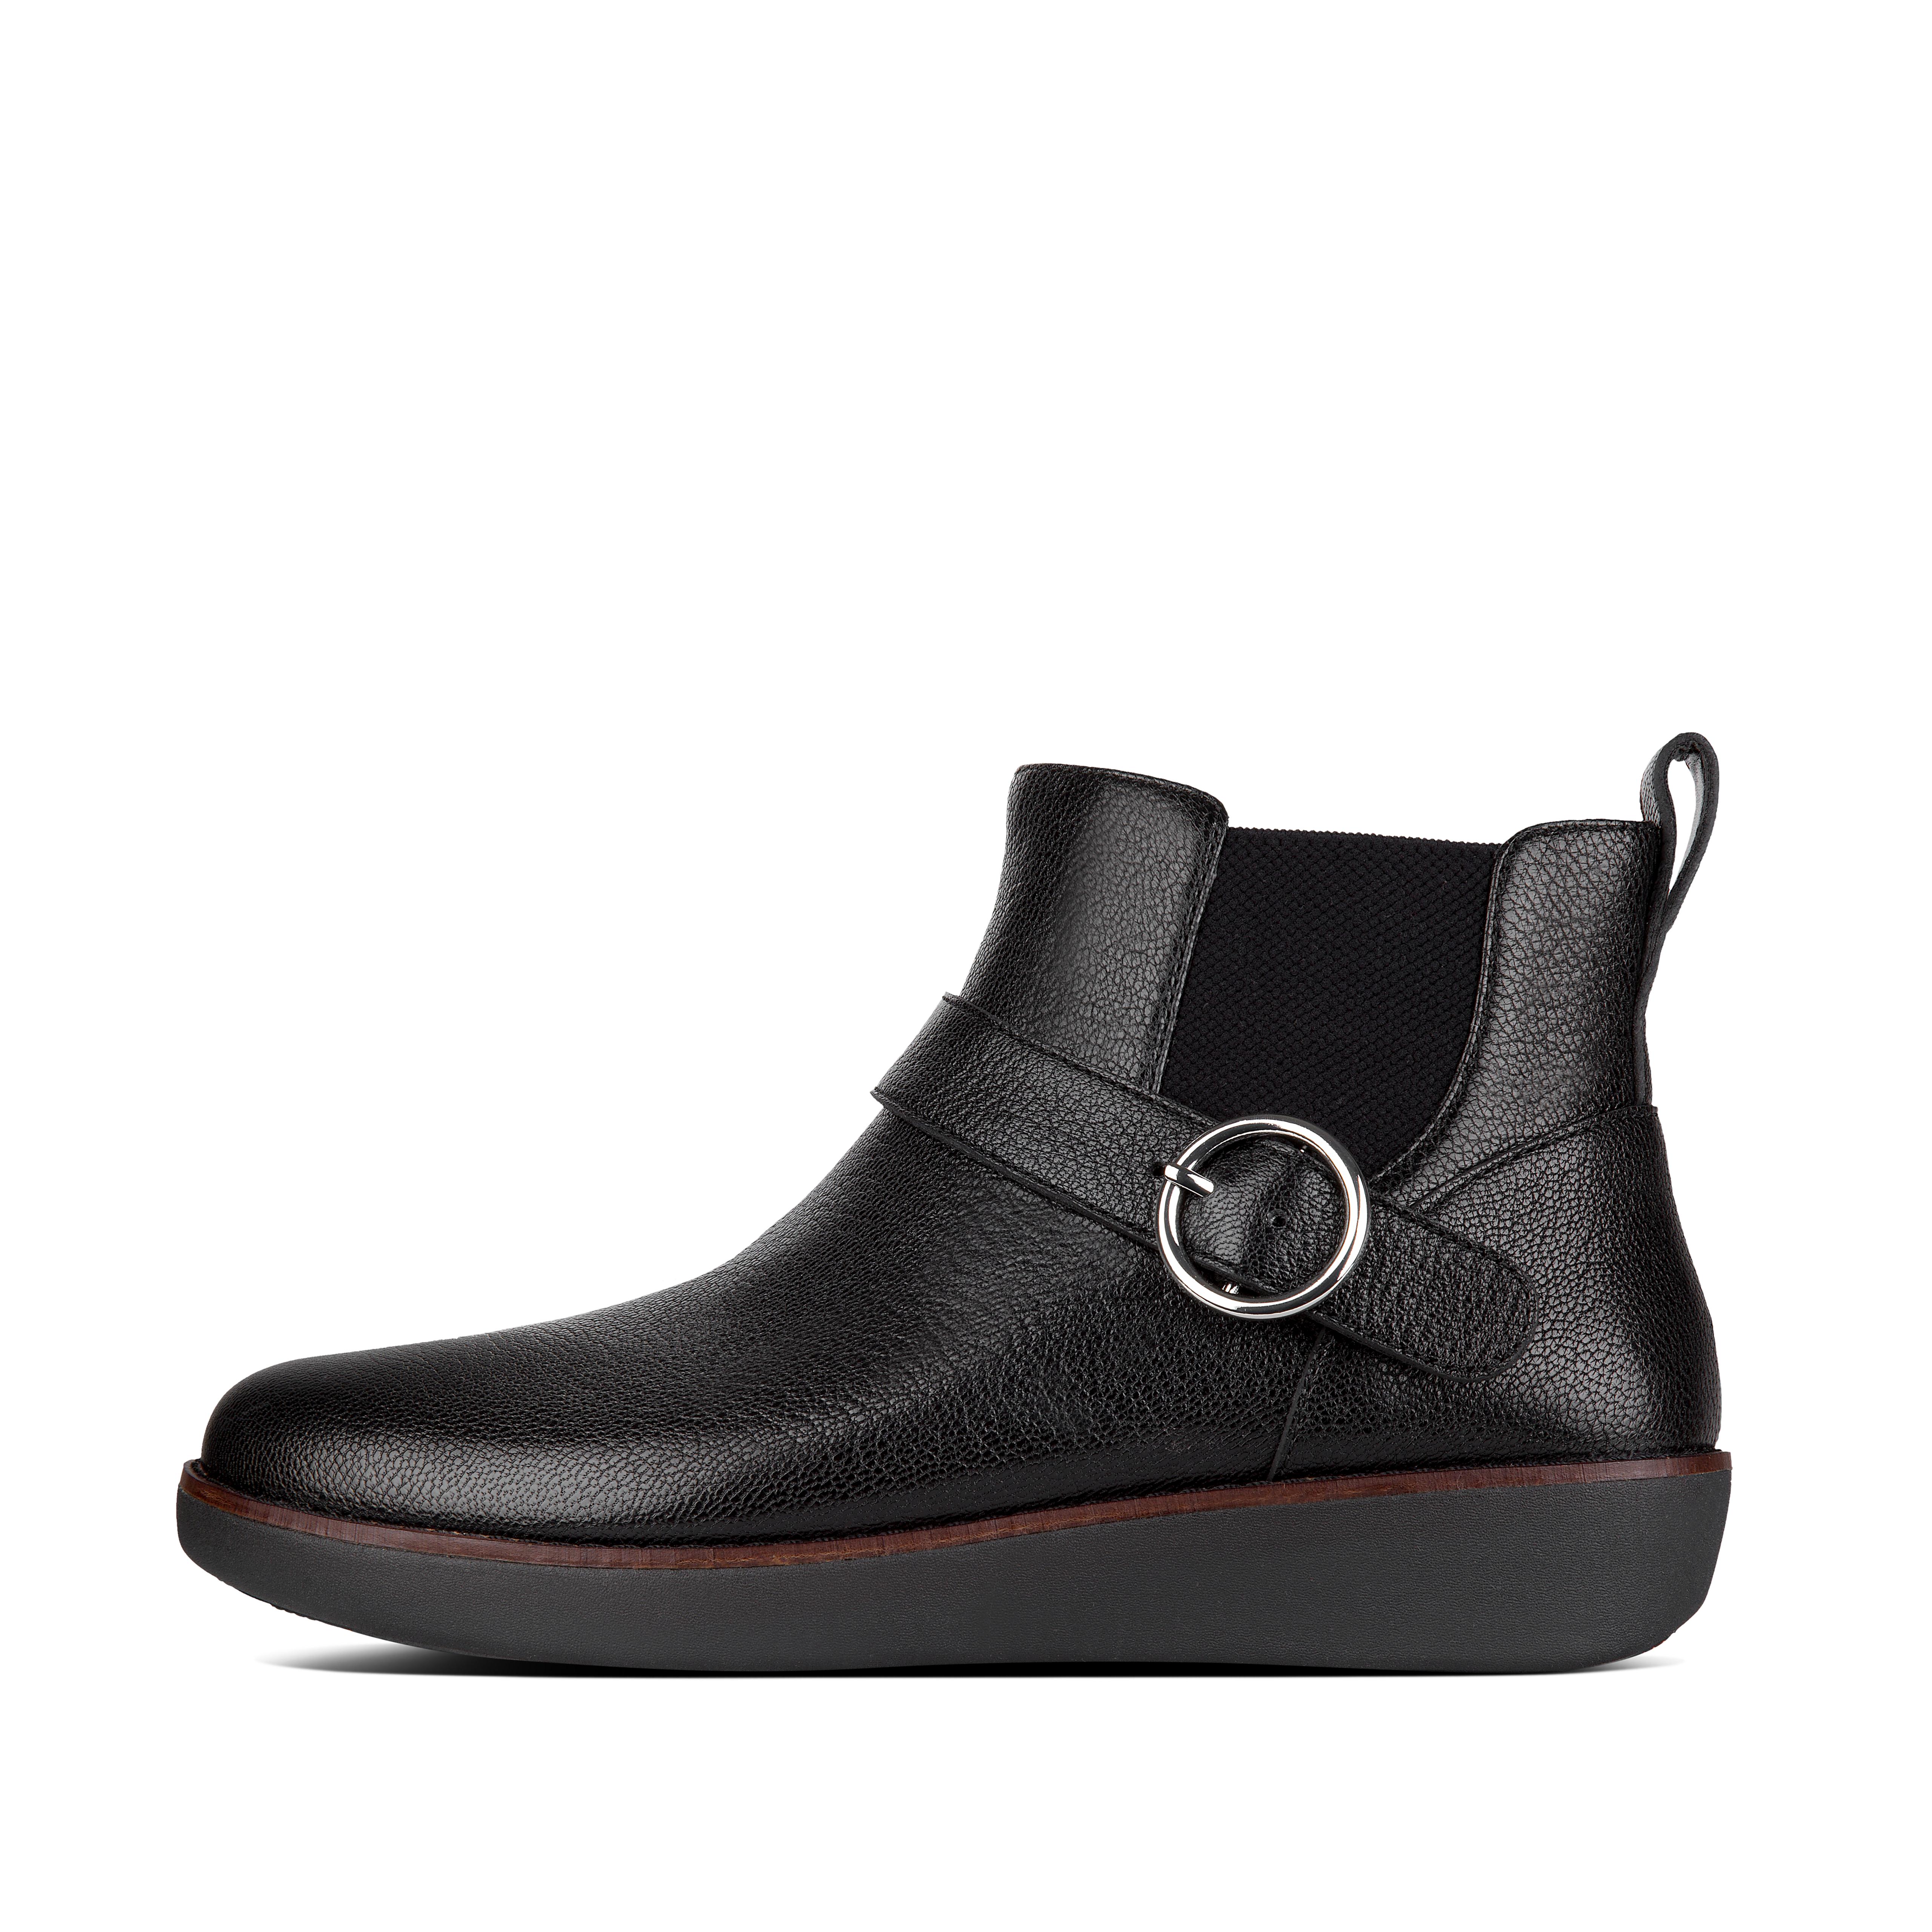 Looking for Chelsea boots with a smart edge? Then check these out. Shiny statement buckles, sleek design lines and tumbled leather uppers ramp up the sophistication. Yet they're soft to pull on and, thanks to our amazing Supercom FF midsoles, you'll feel like you're wearing your favourite sneakers.